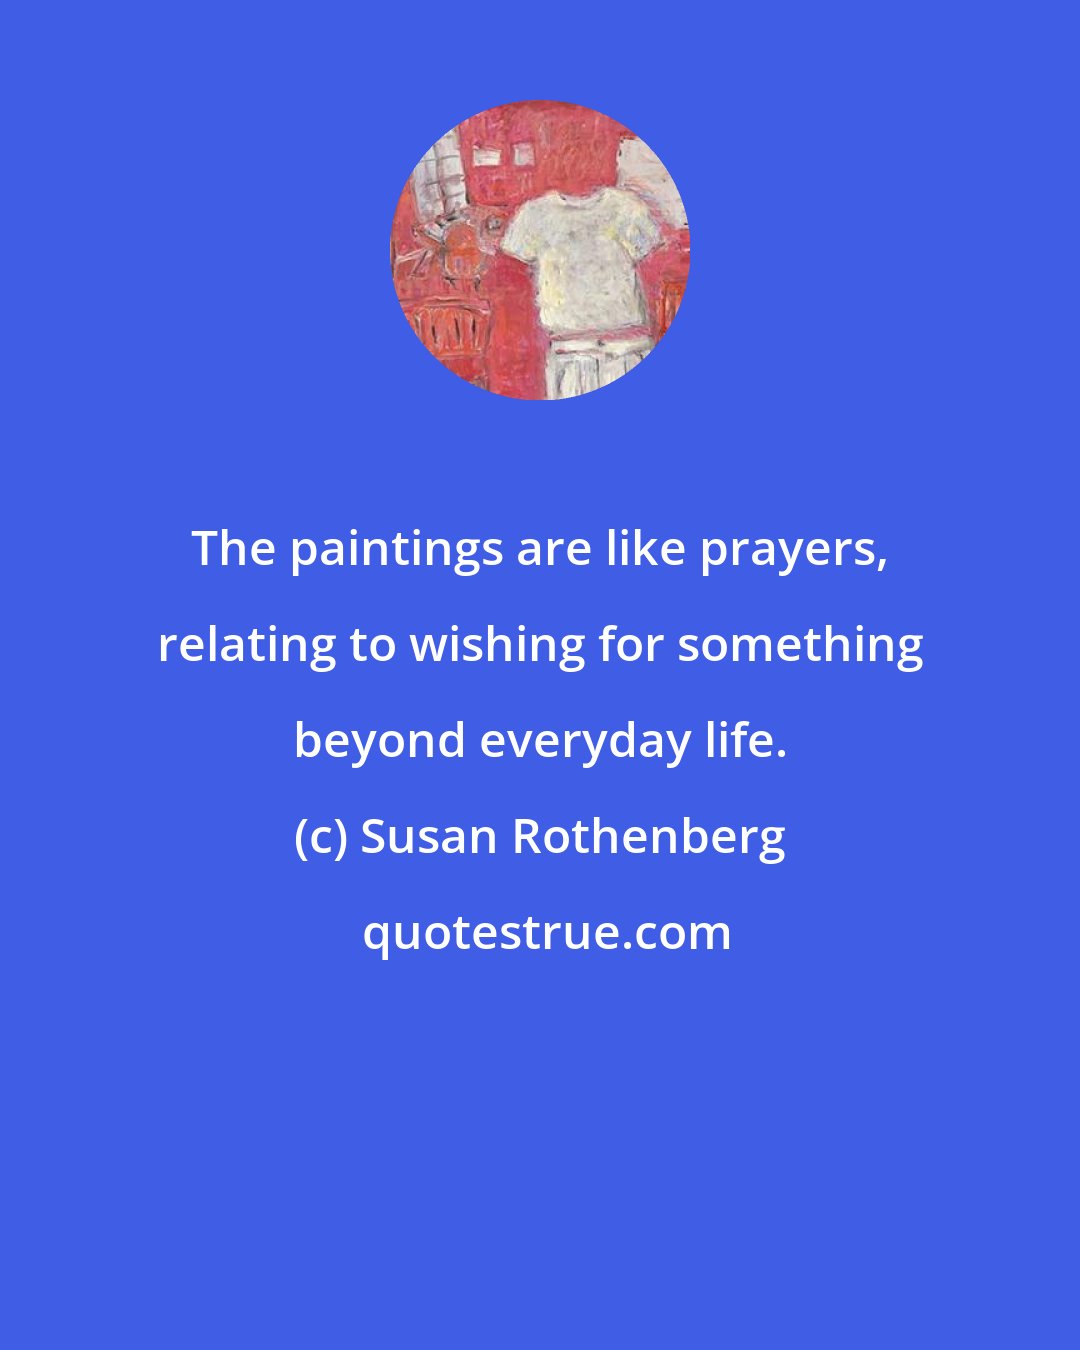 Susan Rothenberg: The paintings are like prayers, relating to wishing for something beyond everyday life.